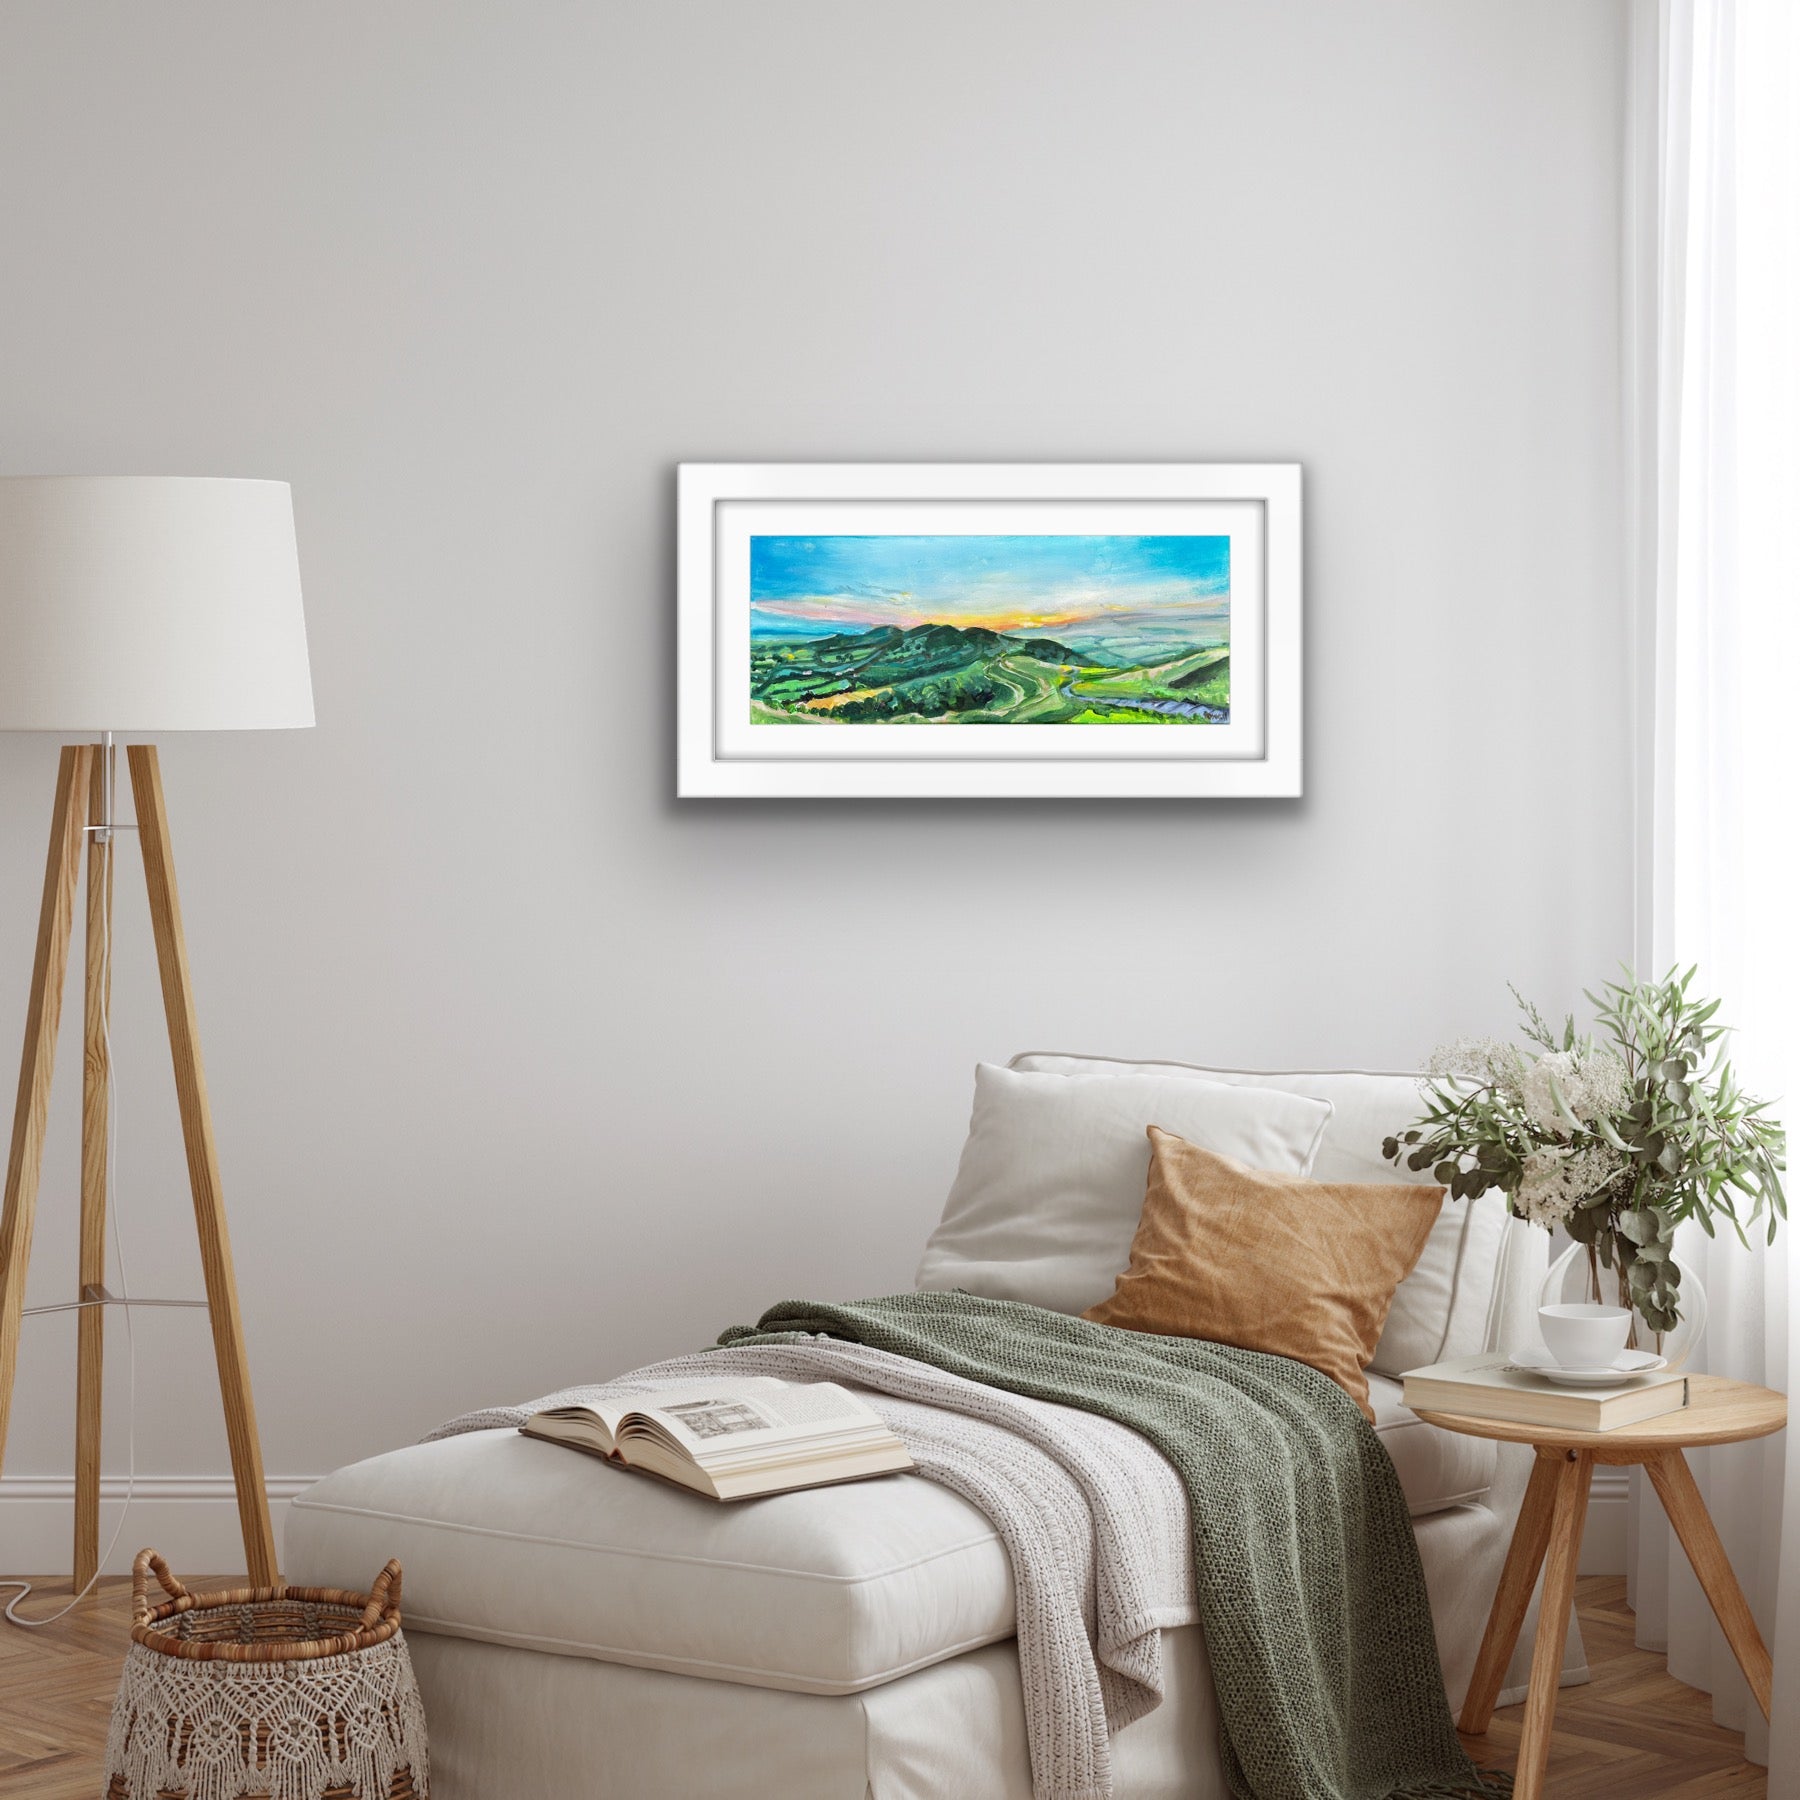 Original painting of Dawn at the Malvern Hills by Worcestershire Artist Margaret Powell displayed in a white frame above a bed